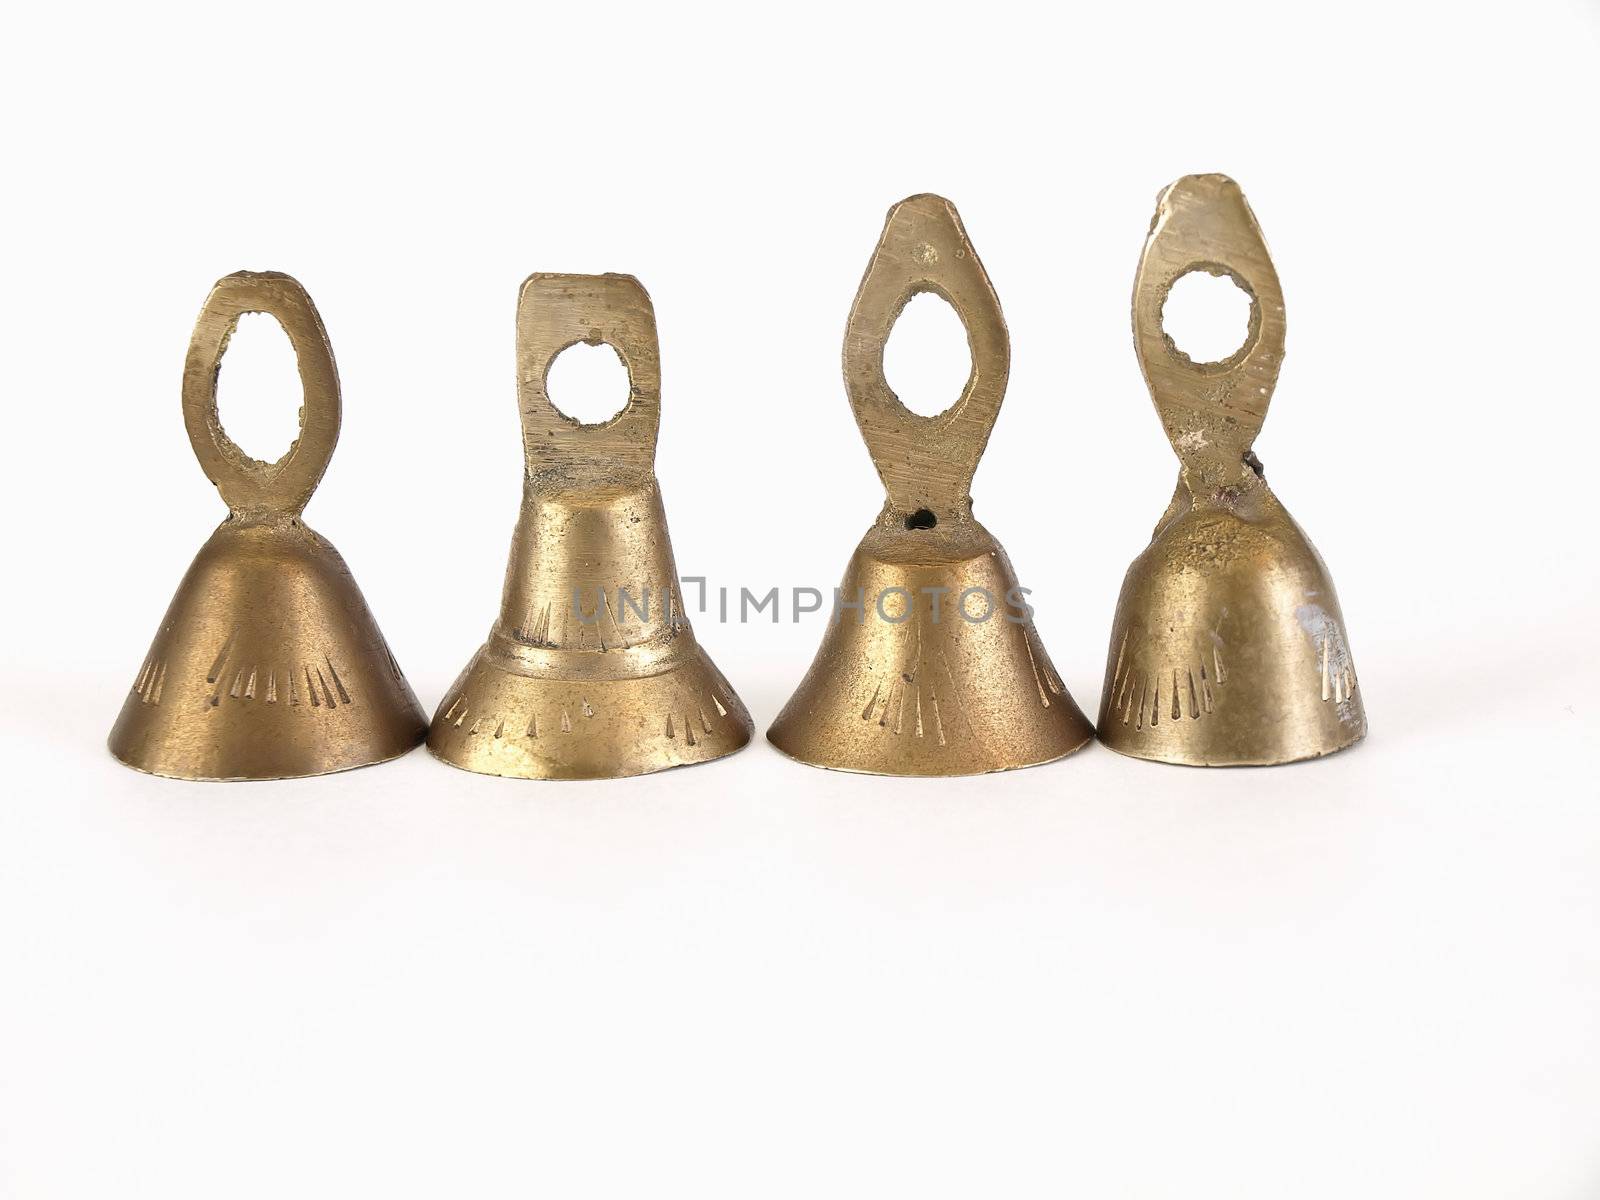 Four brass bells isolated on a white background.